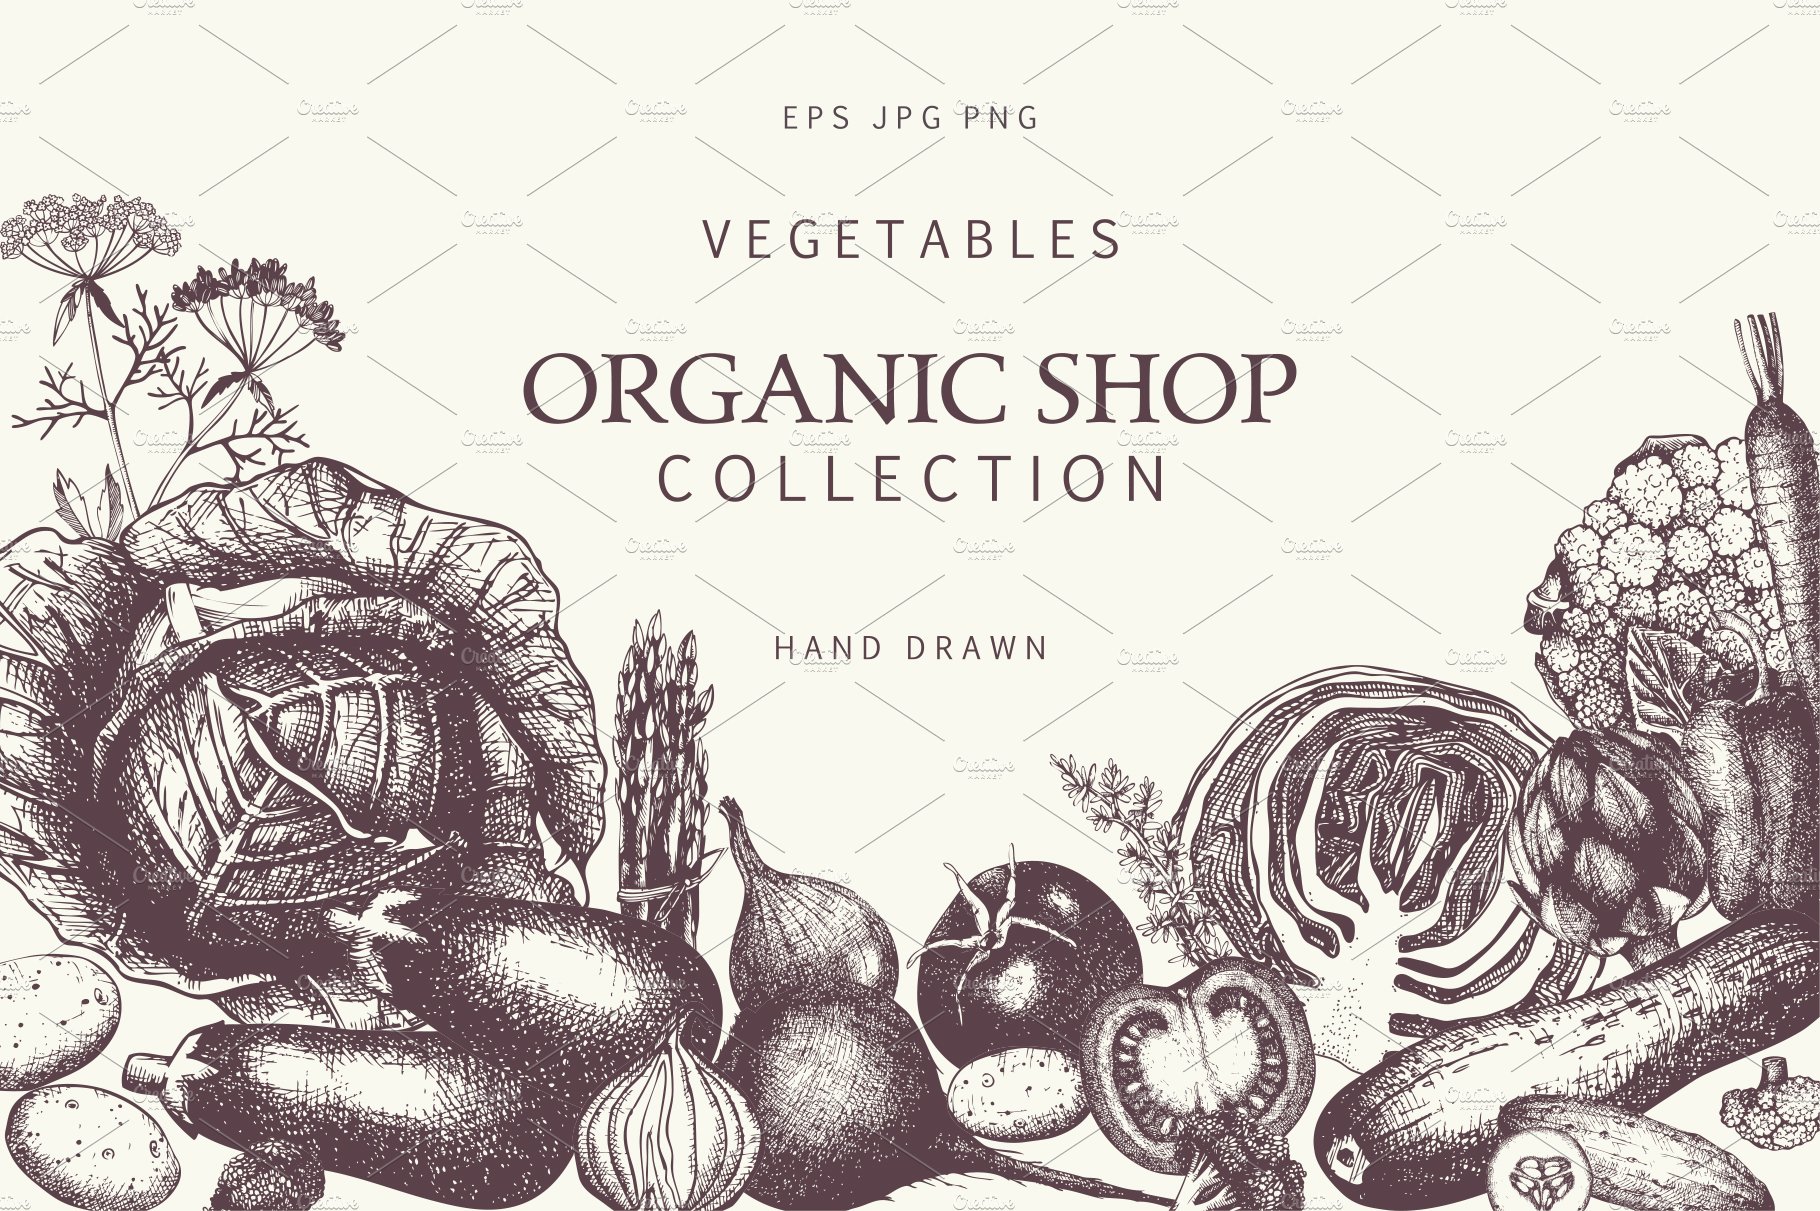 Hand Drawn Vegetables Collection cover image.